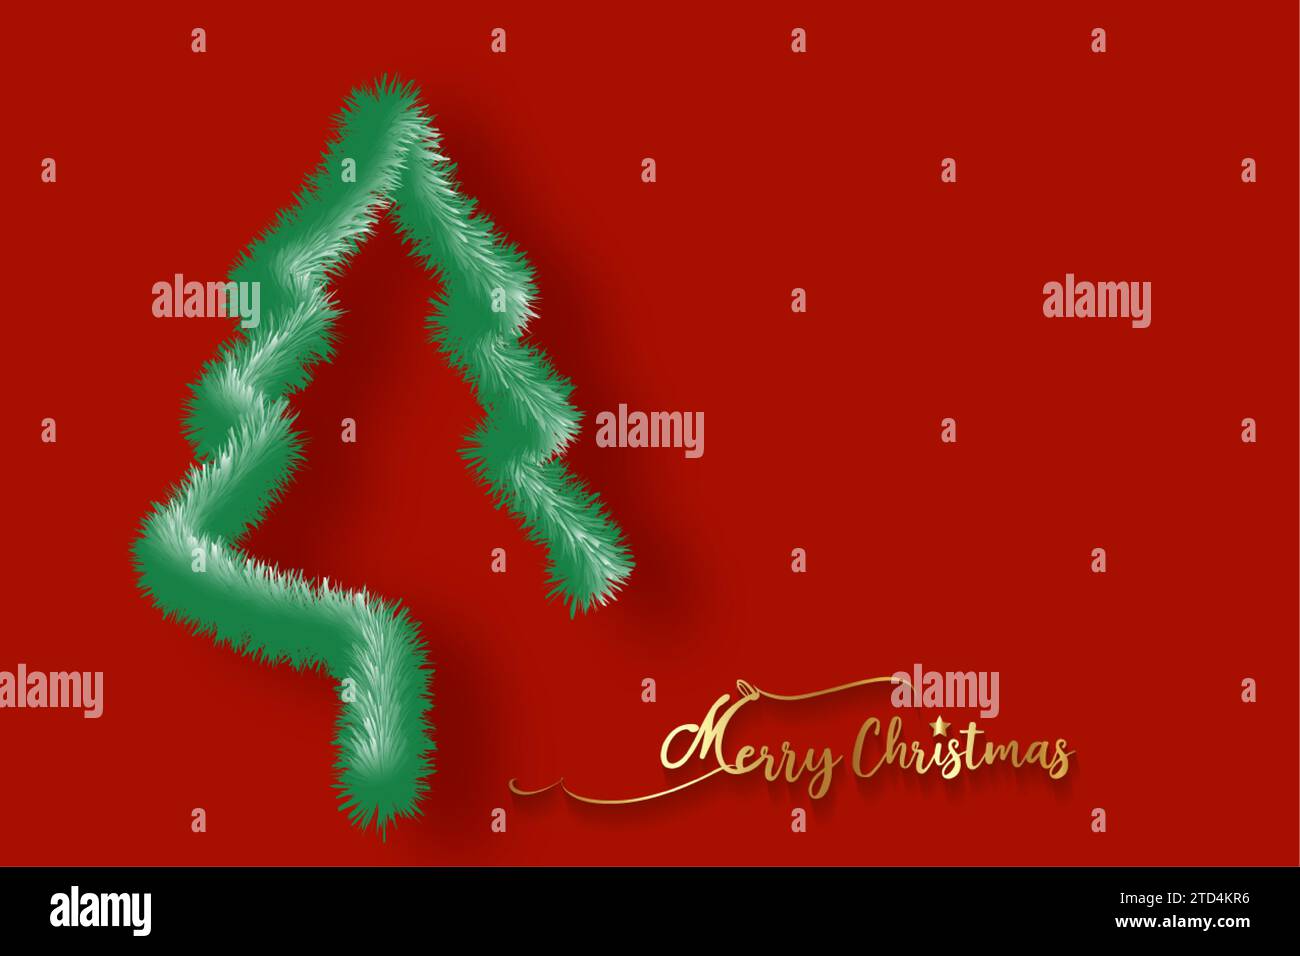 Christmas Tree background and  Merry Christmas gold calligraphy. Green Fir tree symbol in fur effect style. Holidays vector red template Stock Vector